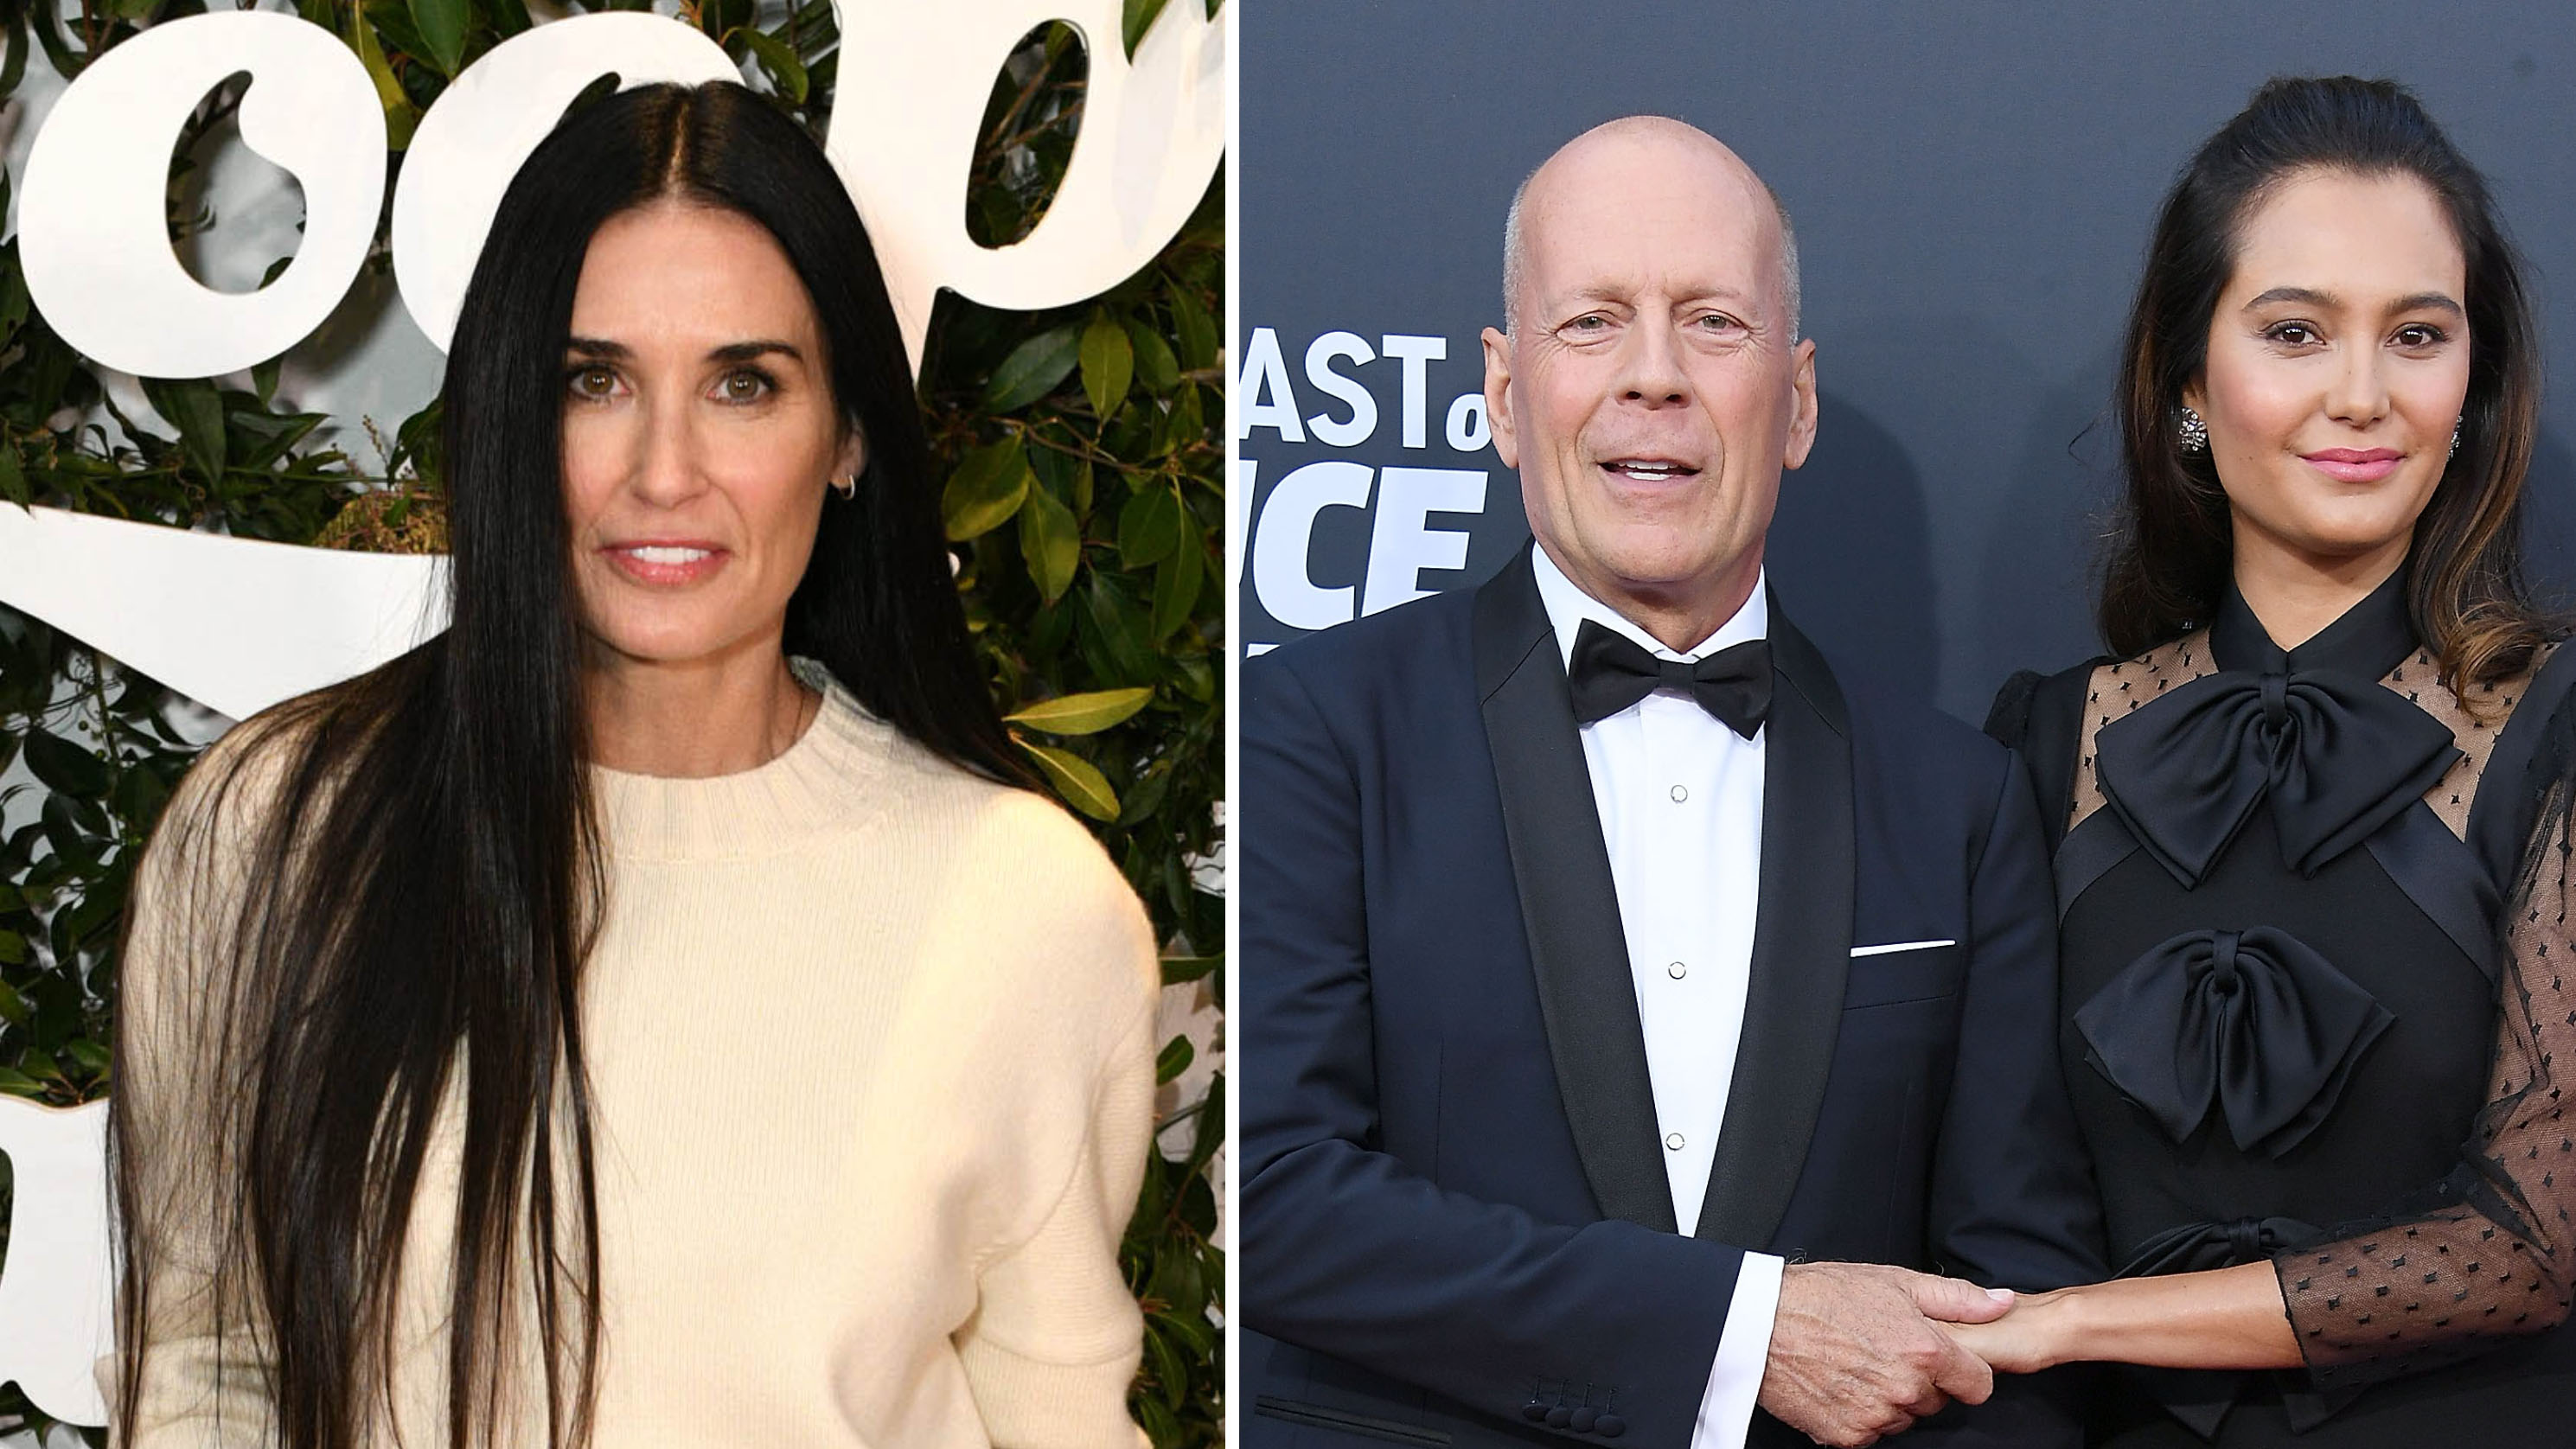 Bruce Willis' Wife Emma Heming Has 'Respect' For His Ex Demi Moore